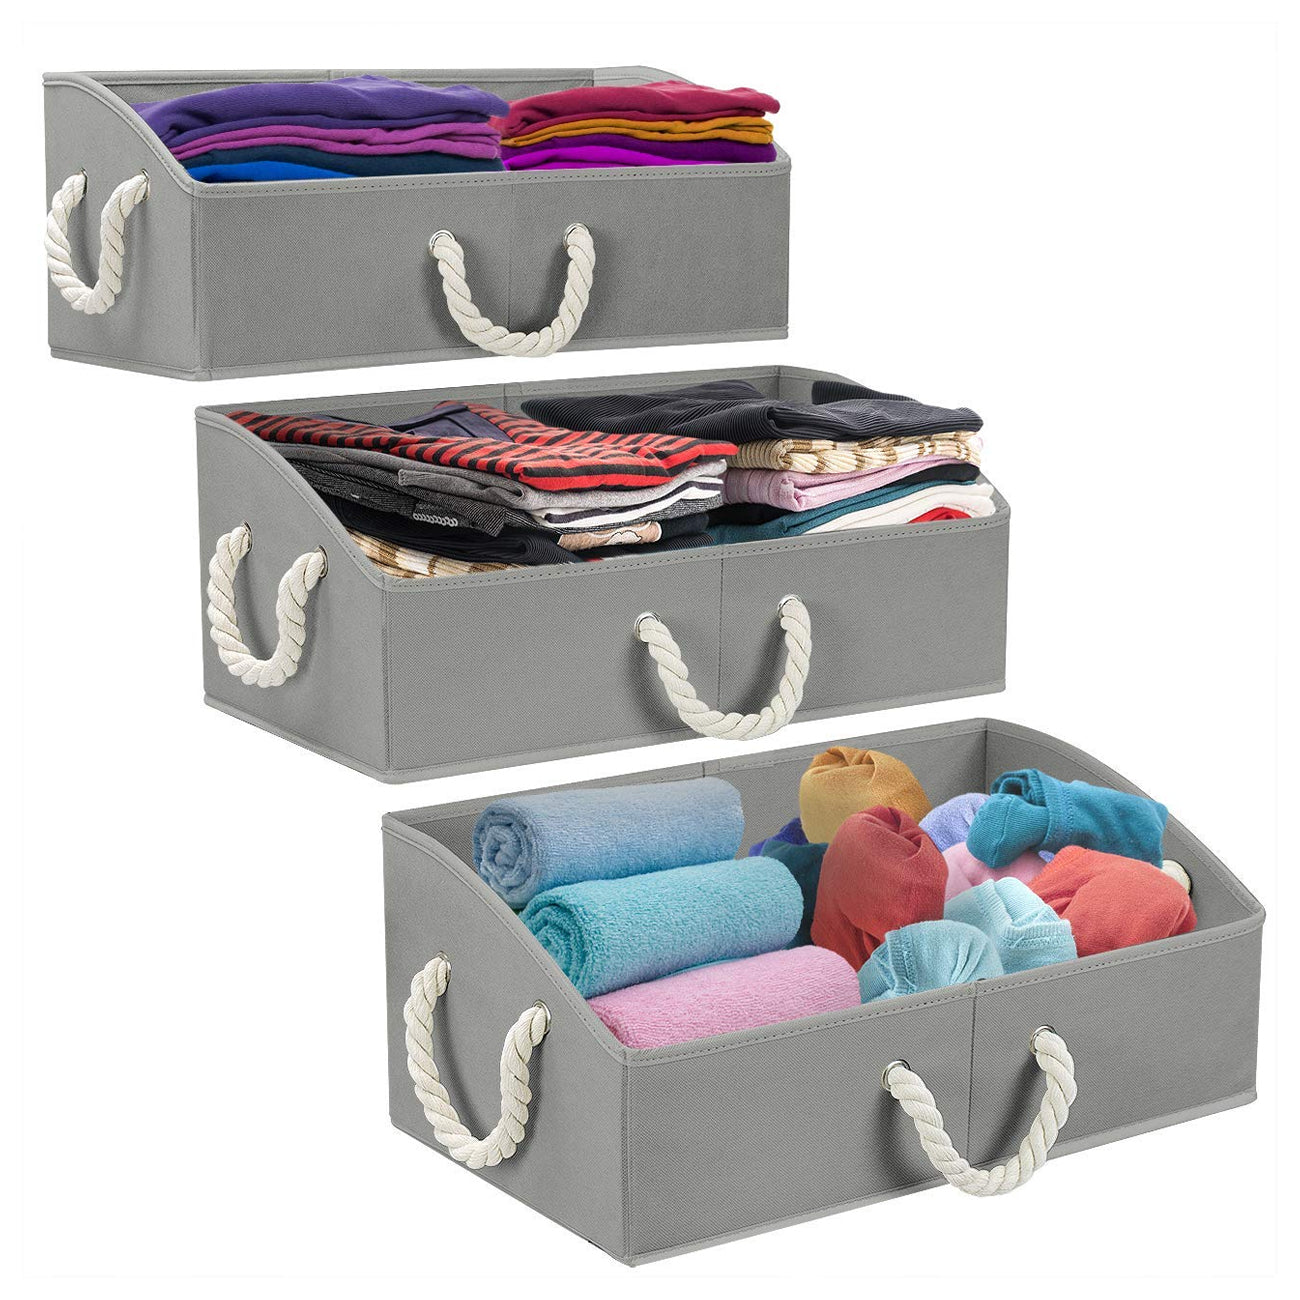 unamax 3 packs closet storage bins - trapezoid large storage box - foldable  fabric baskets for organizing clothes - baby toiletry, t